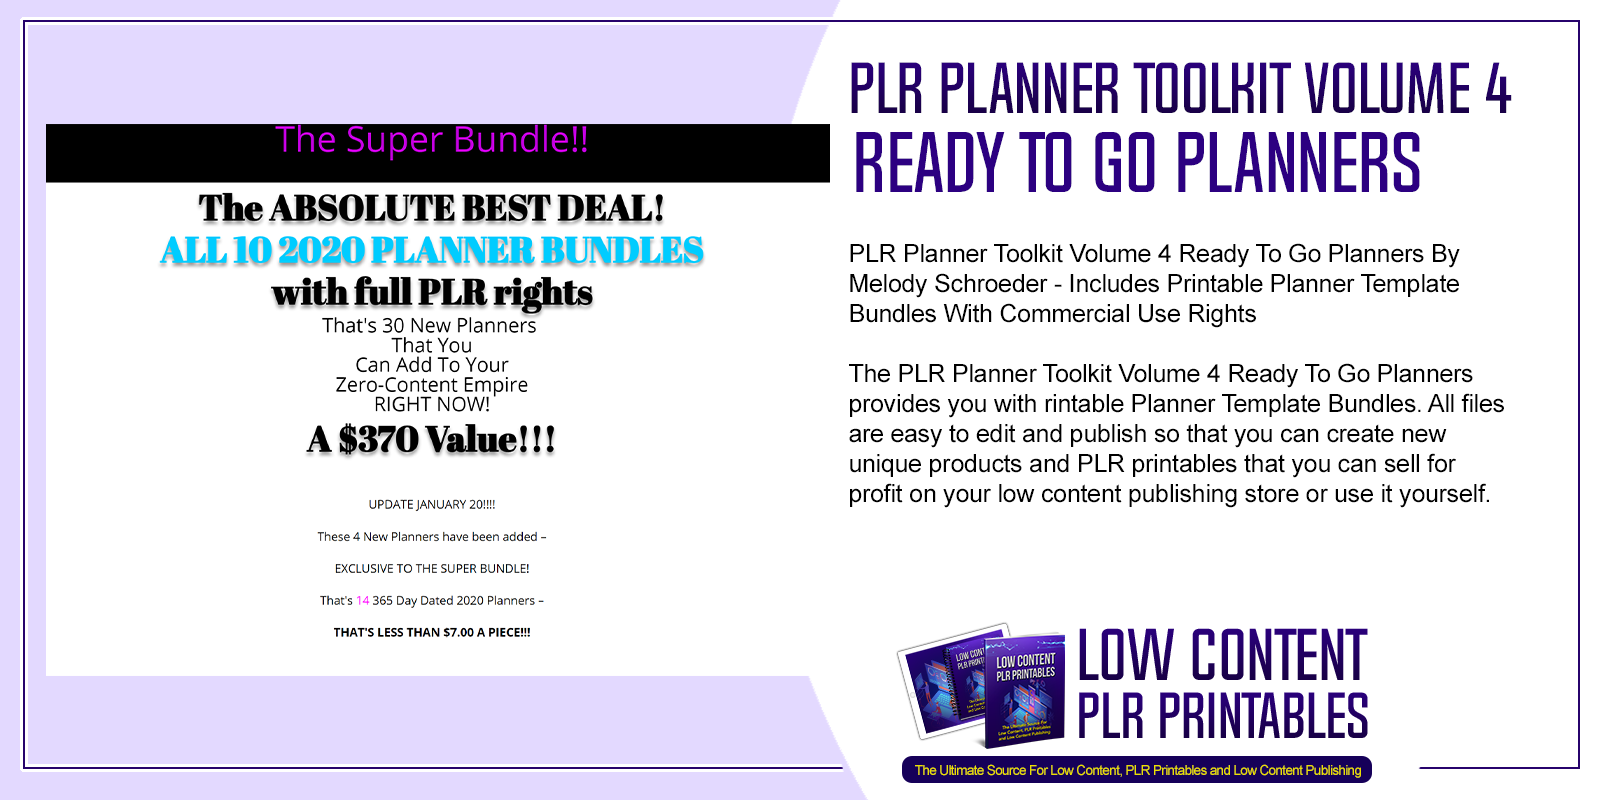 PLR Planner Toolkit Volume 4 Ready To Go Planners